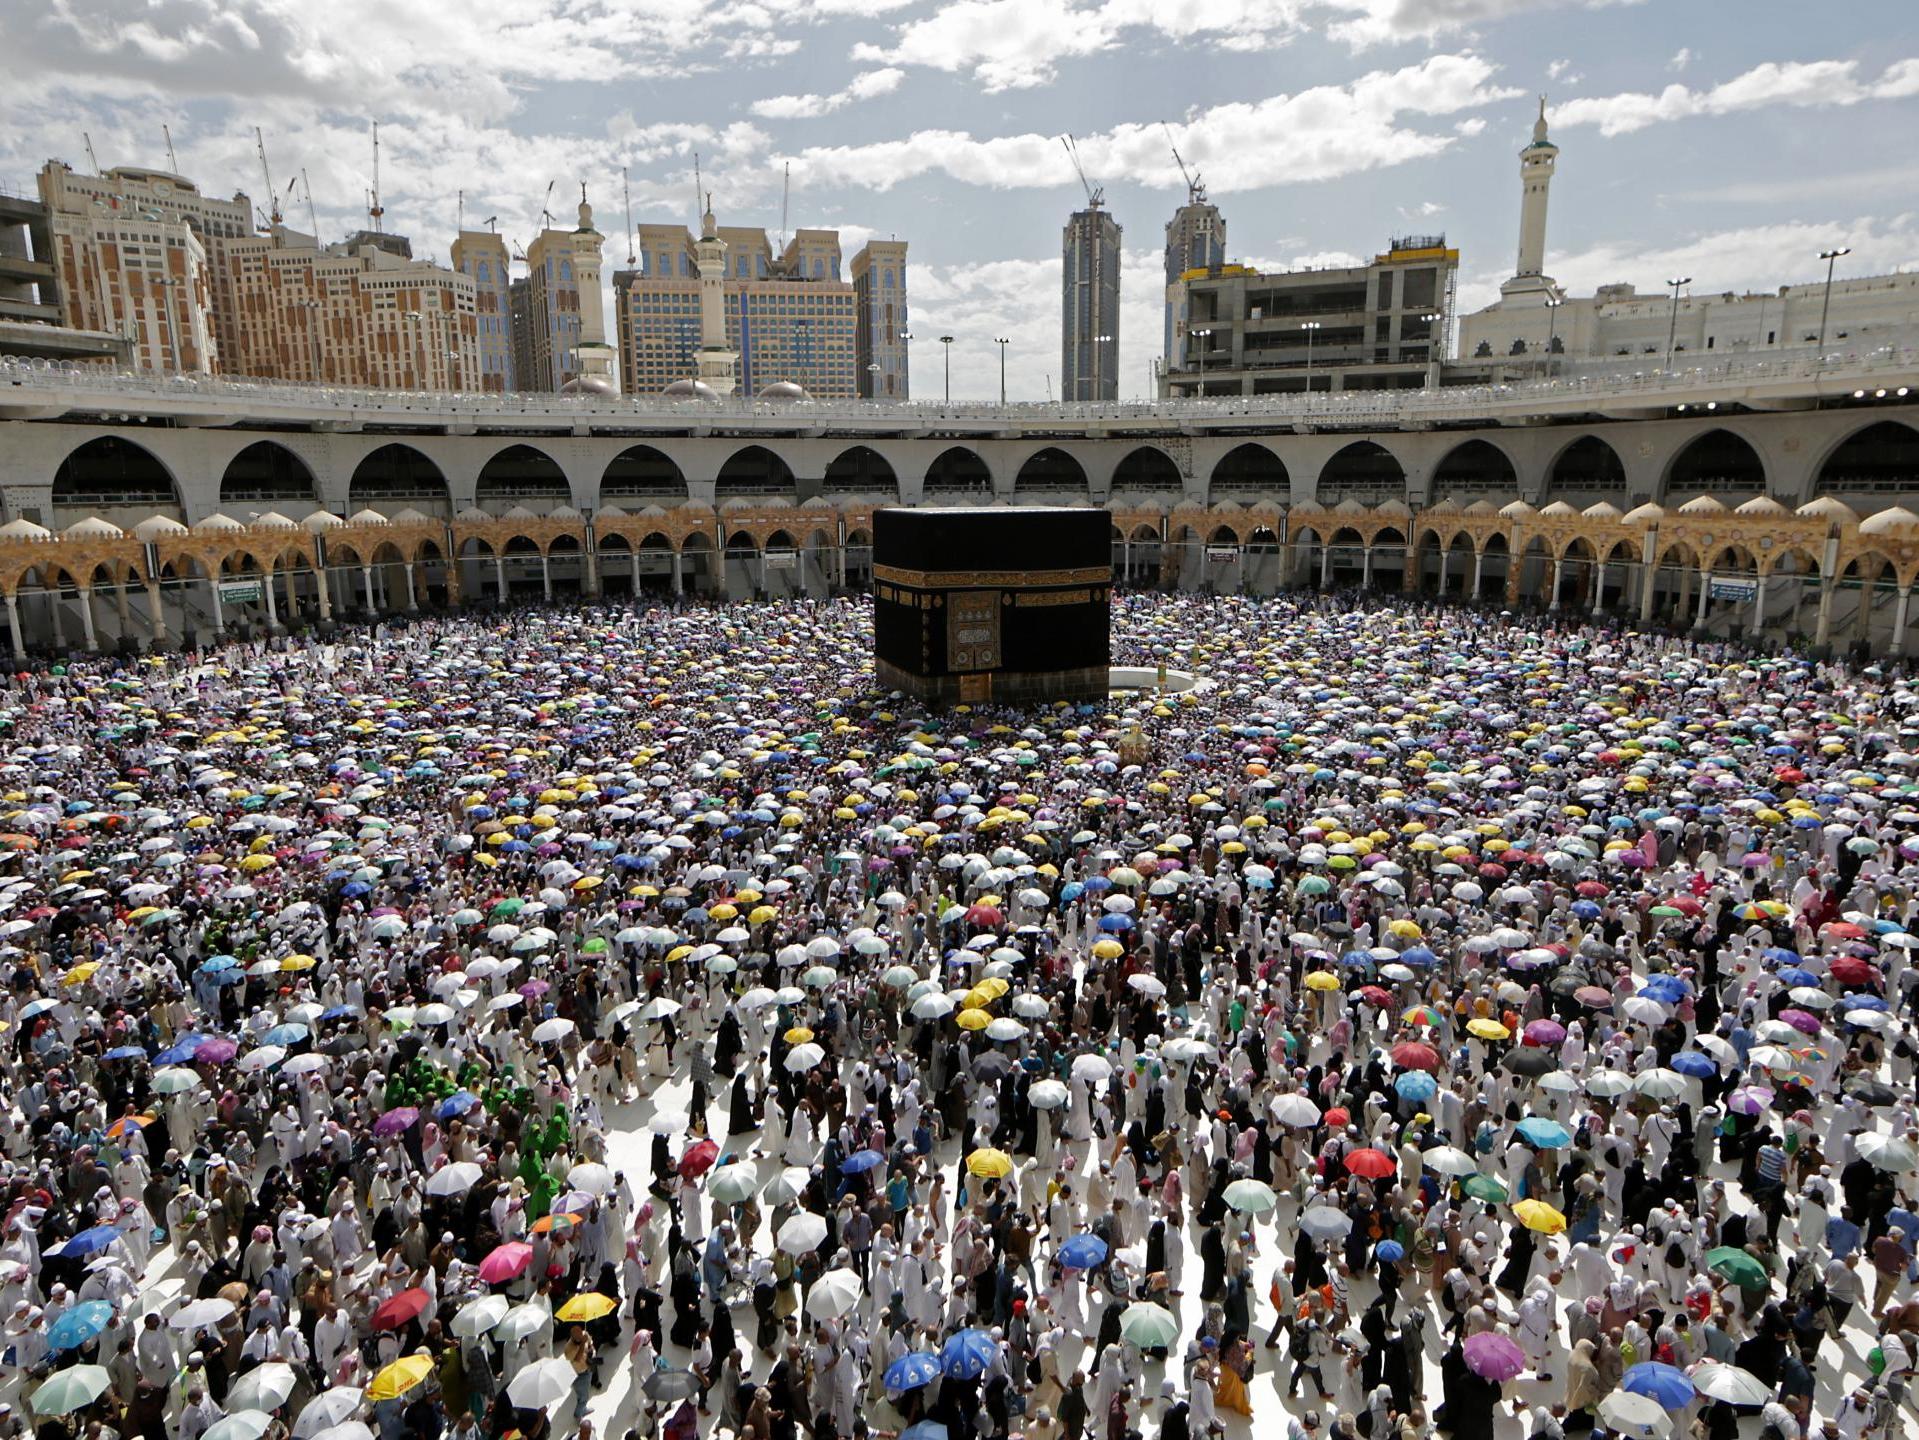 According to state-run media, Saudi Arabia will limit the number of people taking part in this year’s Hajj due to the COVID-19 pandemic. The Hajj wi